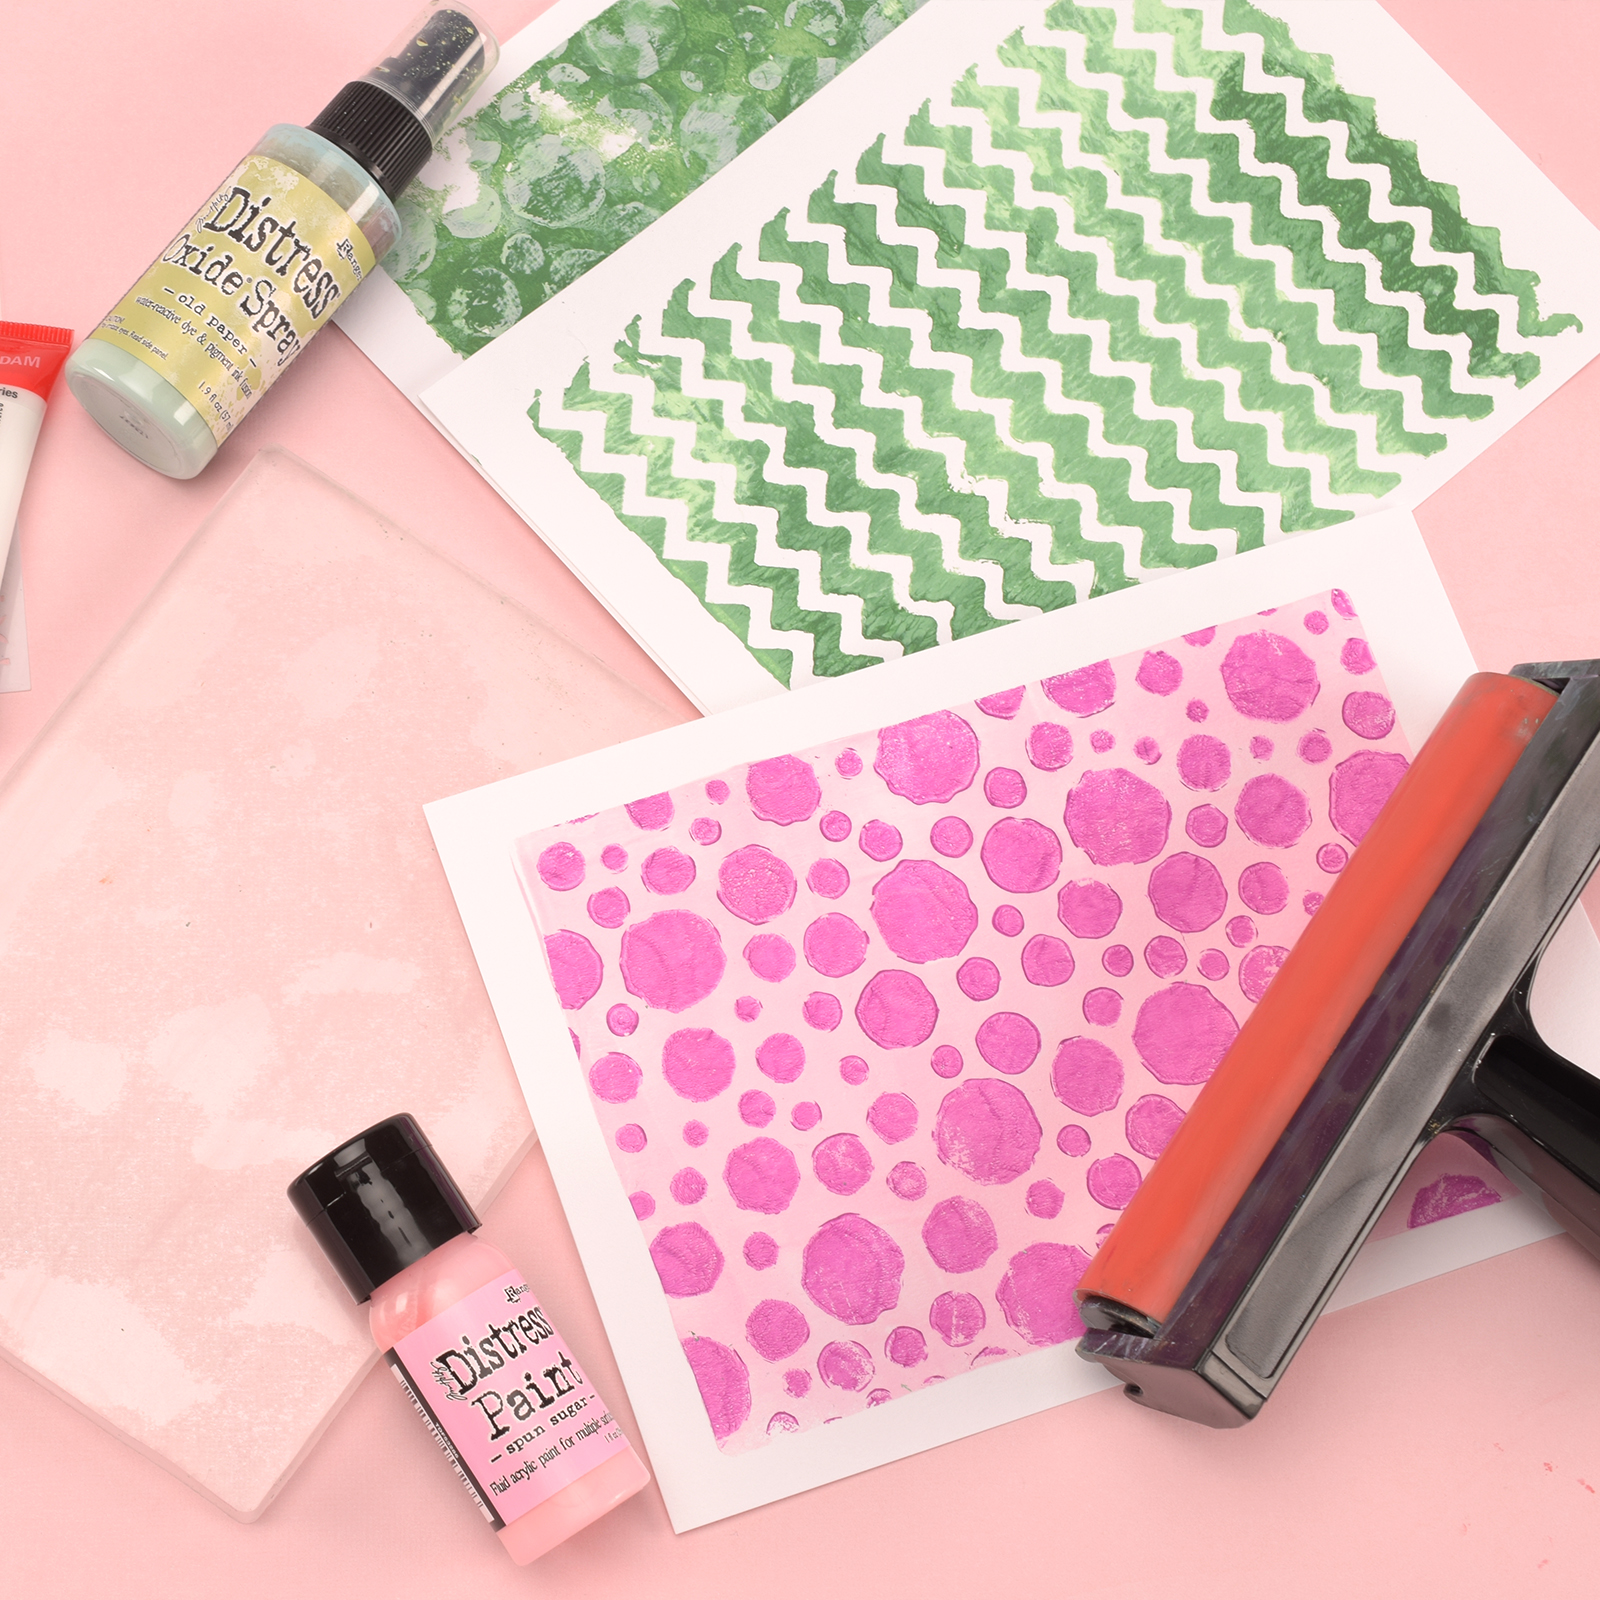 Bring out the mixed media artist in you with Gel Press products! 